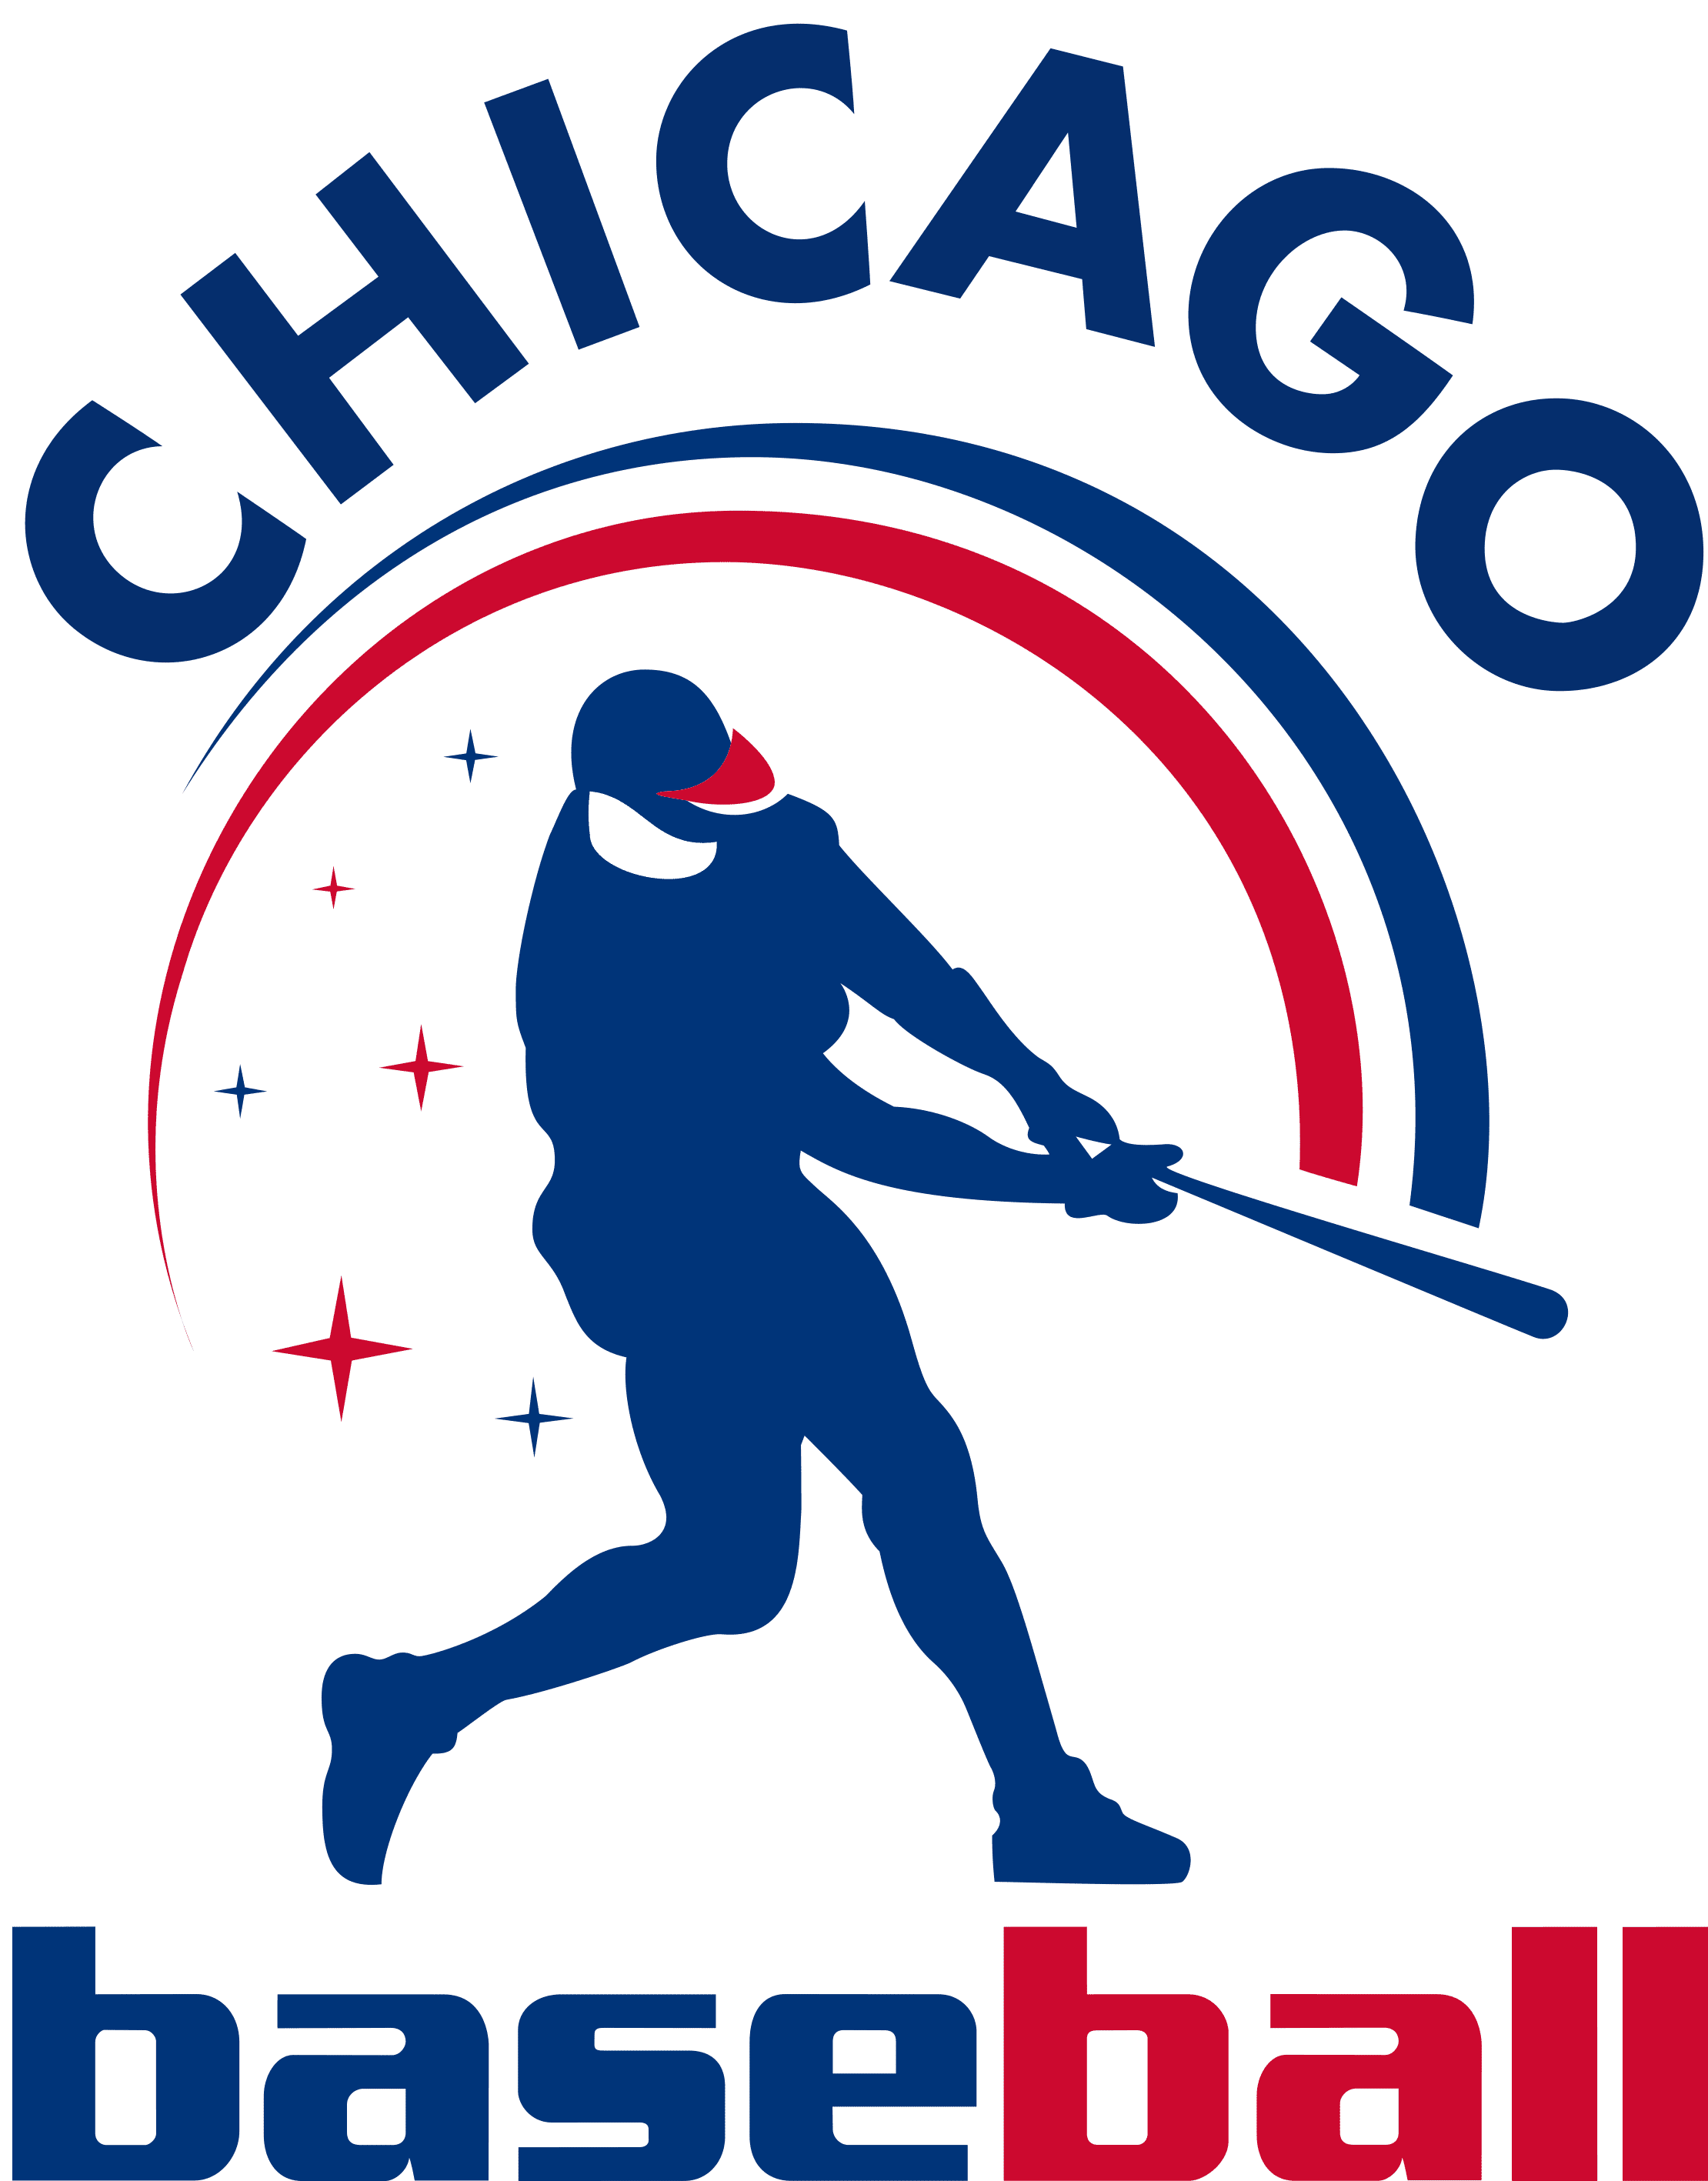 chicago cubs official logo